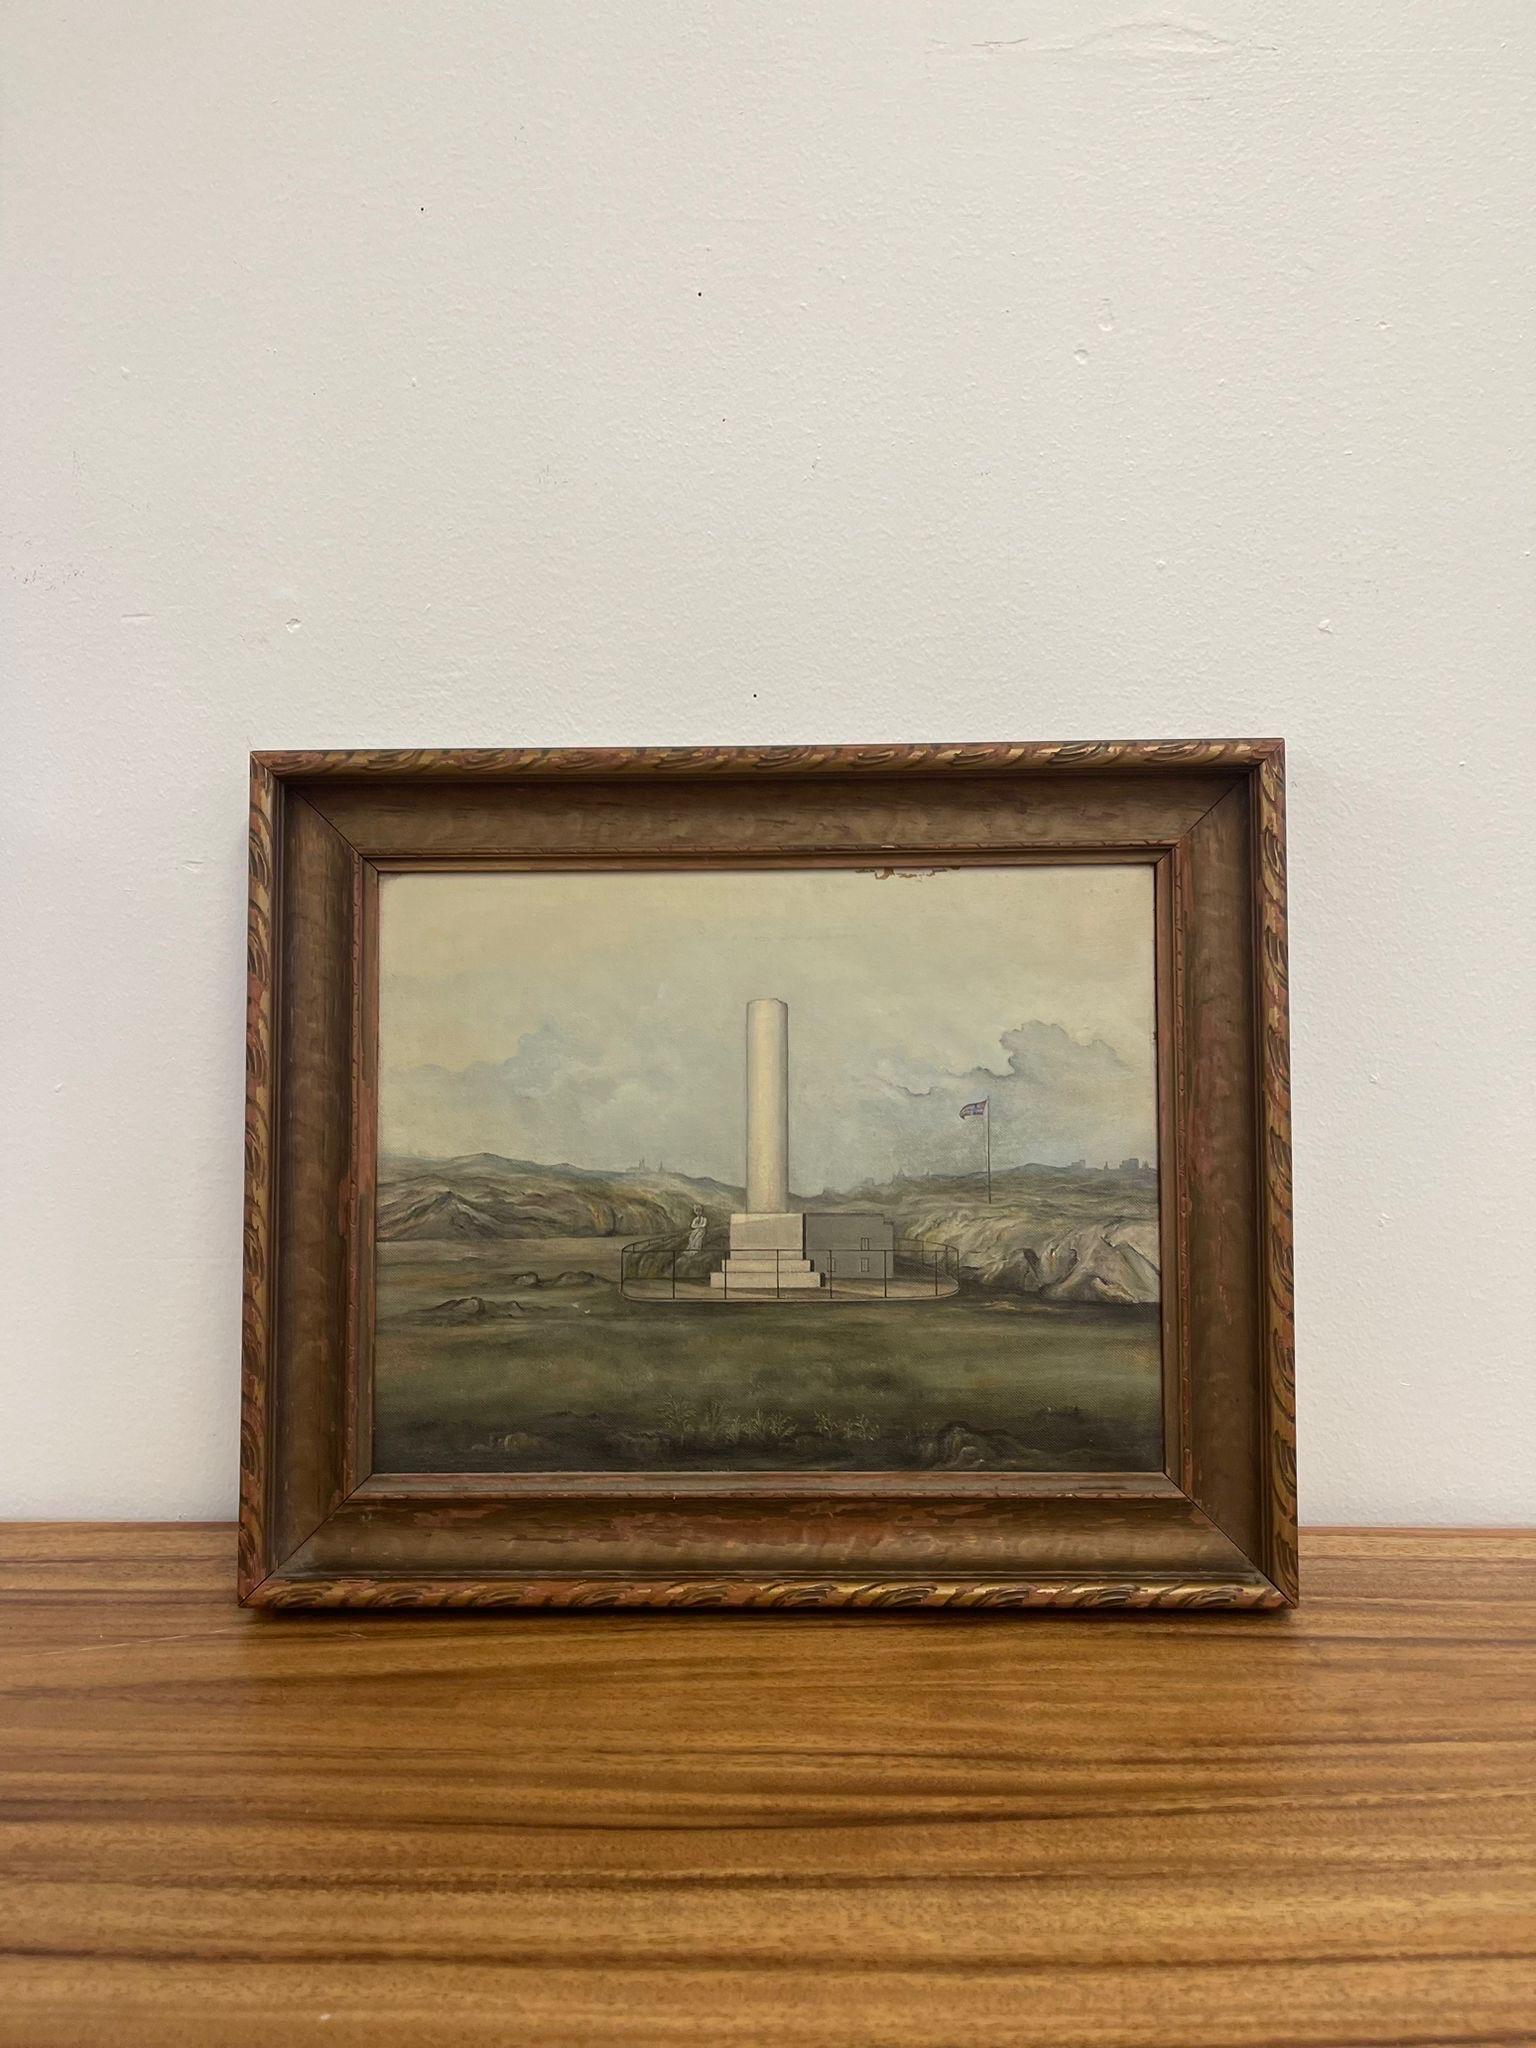 It’s Vintage Unsigned Painting Contains the Norway Flag in the Background and has a white Monument at Center. Possibly Oil on Canvas. Frame and Painting are Petina with Age. Vintage Condition Consistent with Age as Pictured.

Dimensions. 15 W ; 1 D